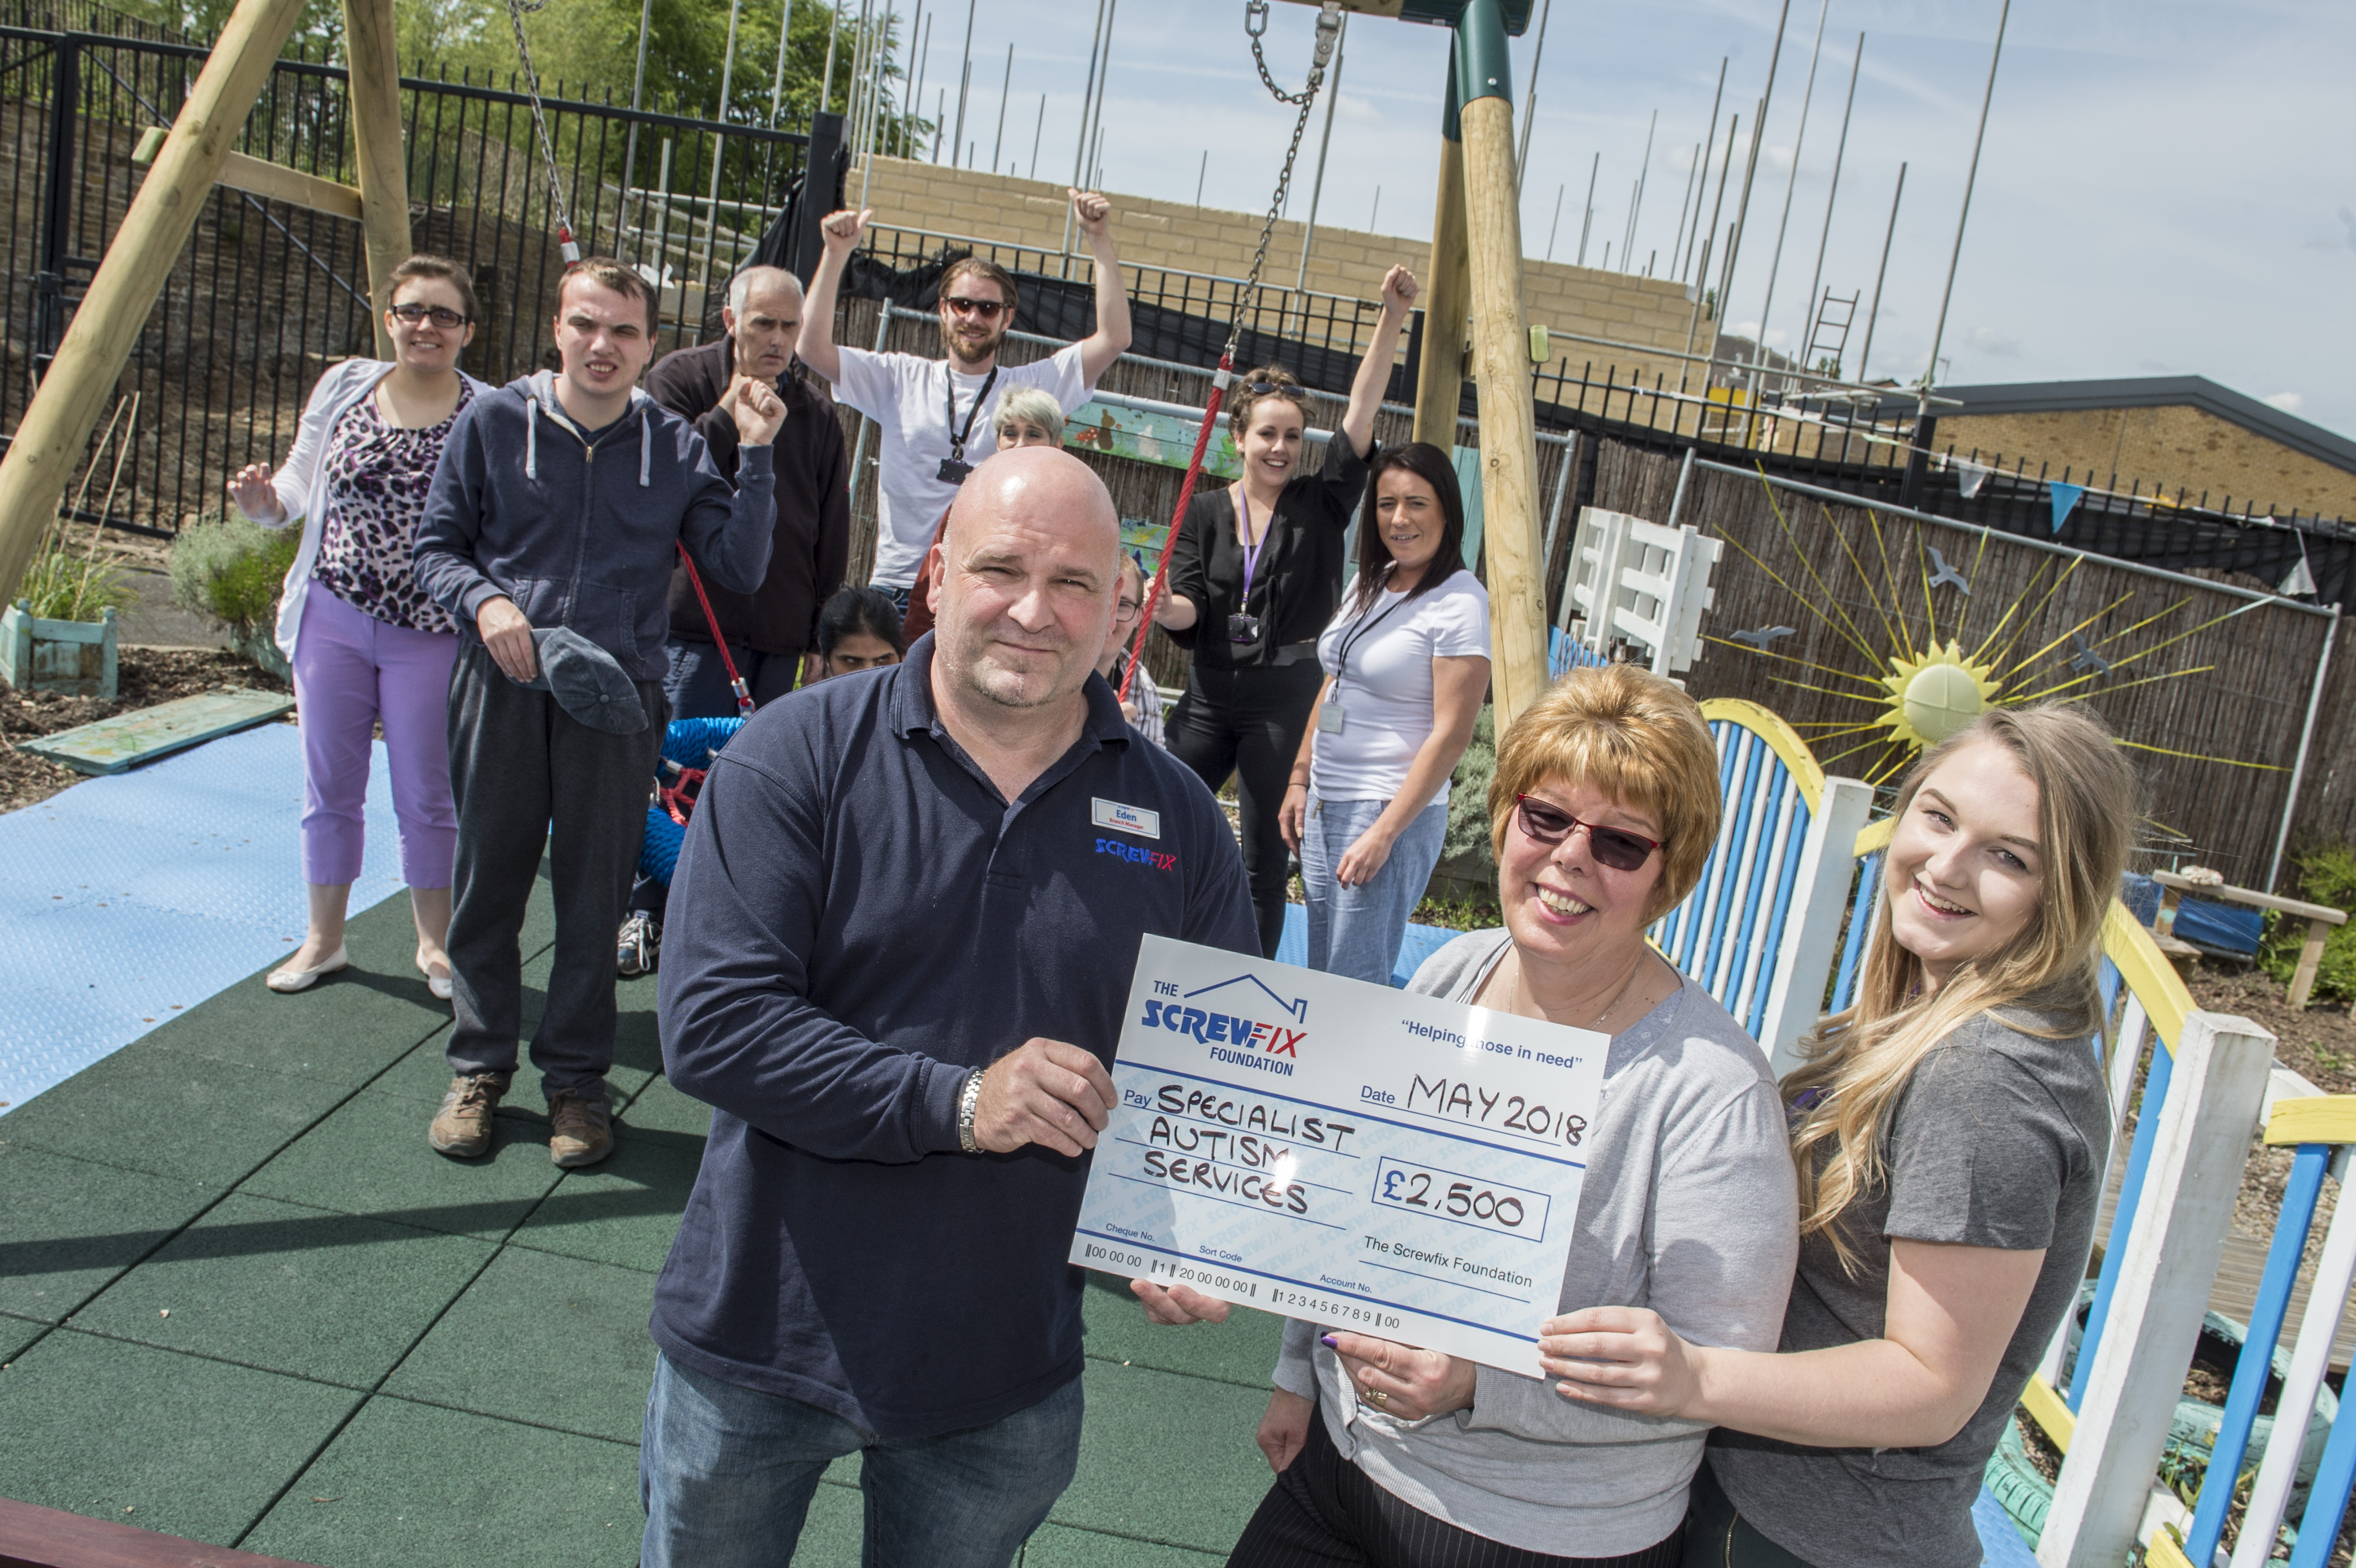 Specialist Austism service charity, Shipley gets a helping hand from the Screwfix Foundation